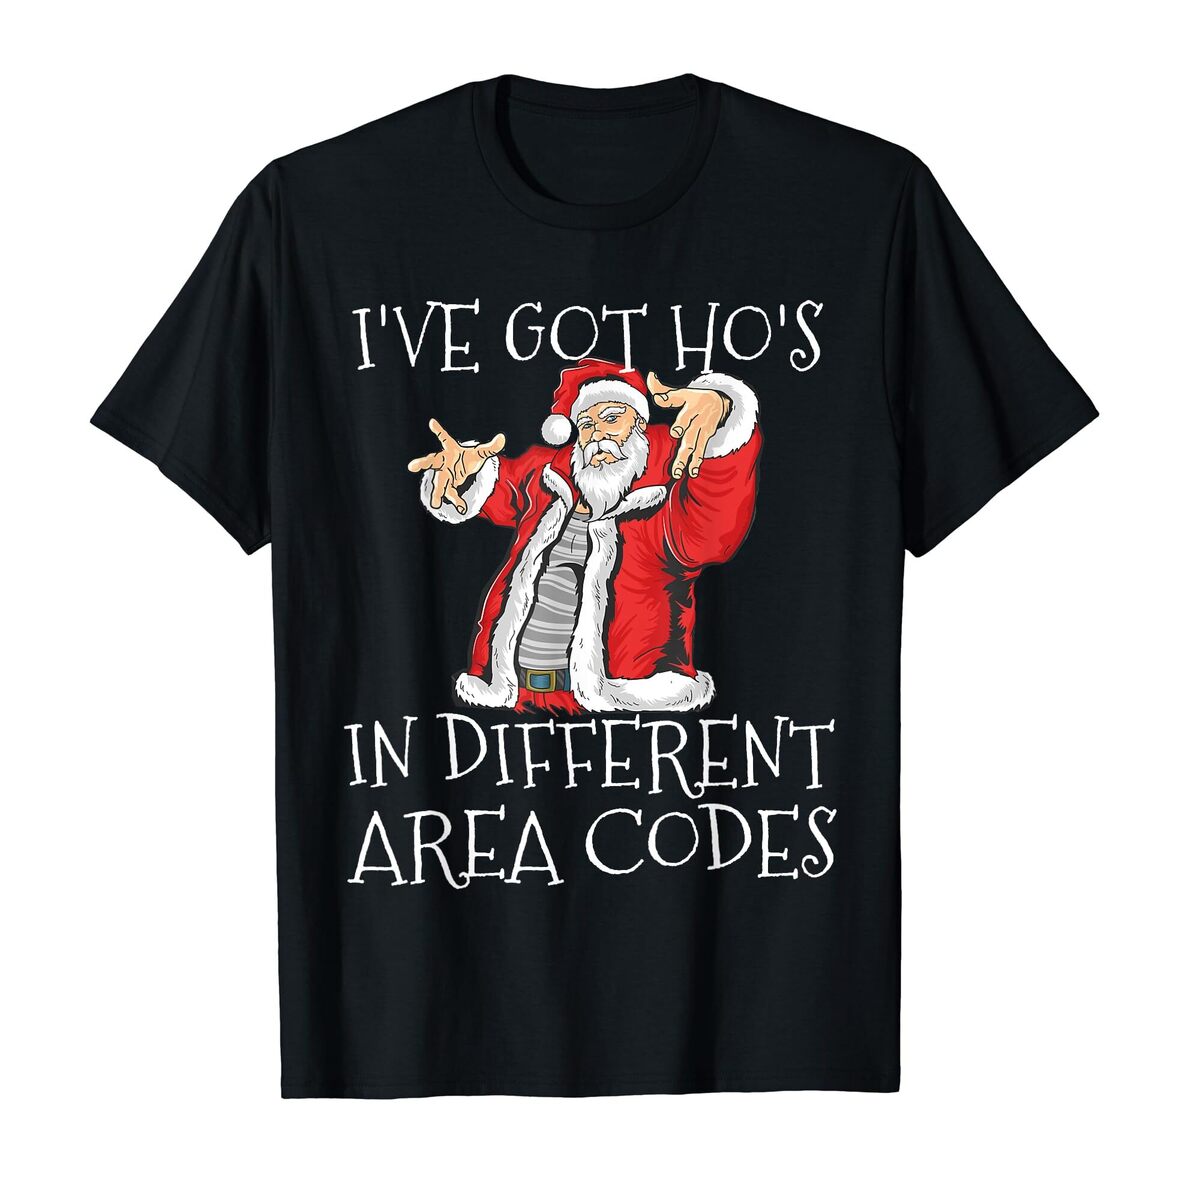 I've Got Ho's in Different Area Codes T-Shirt